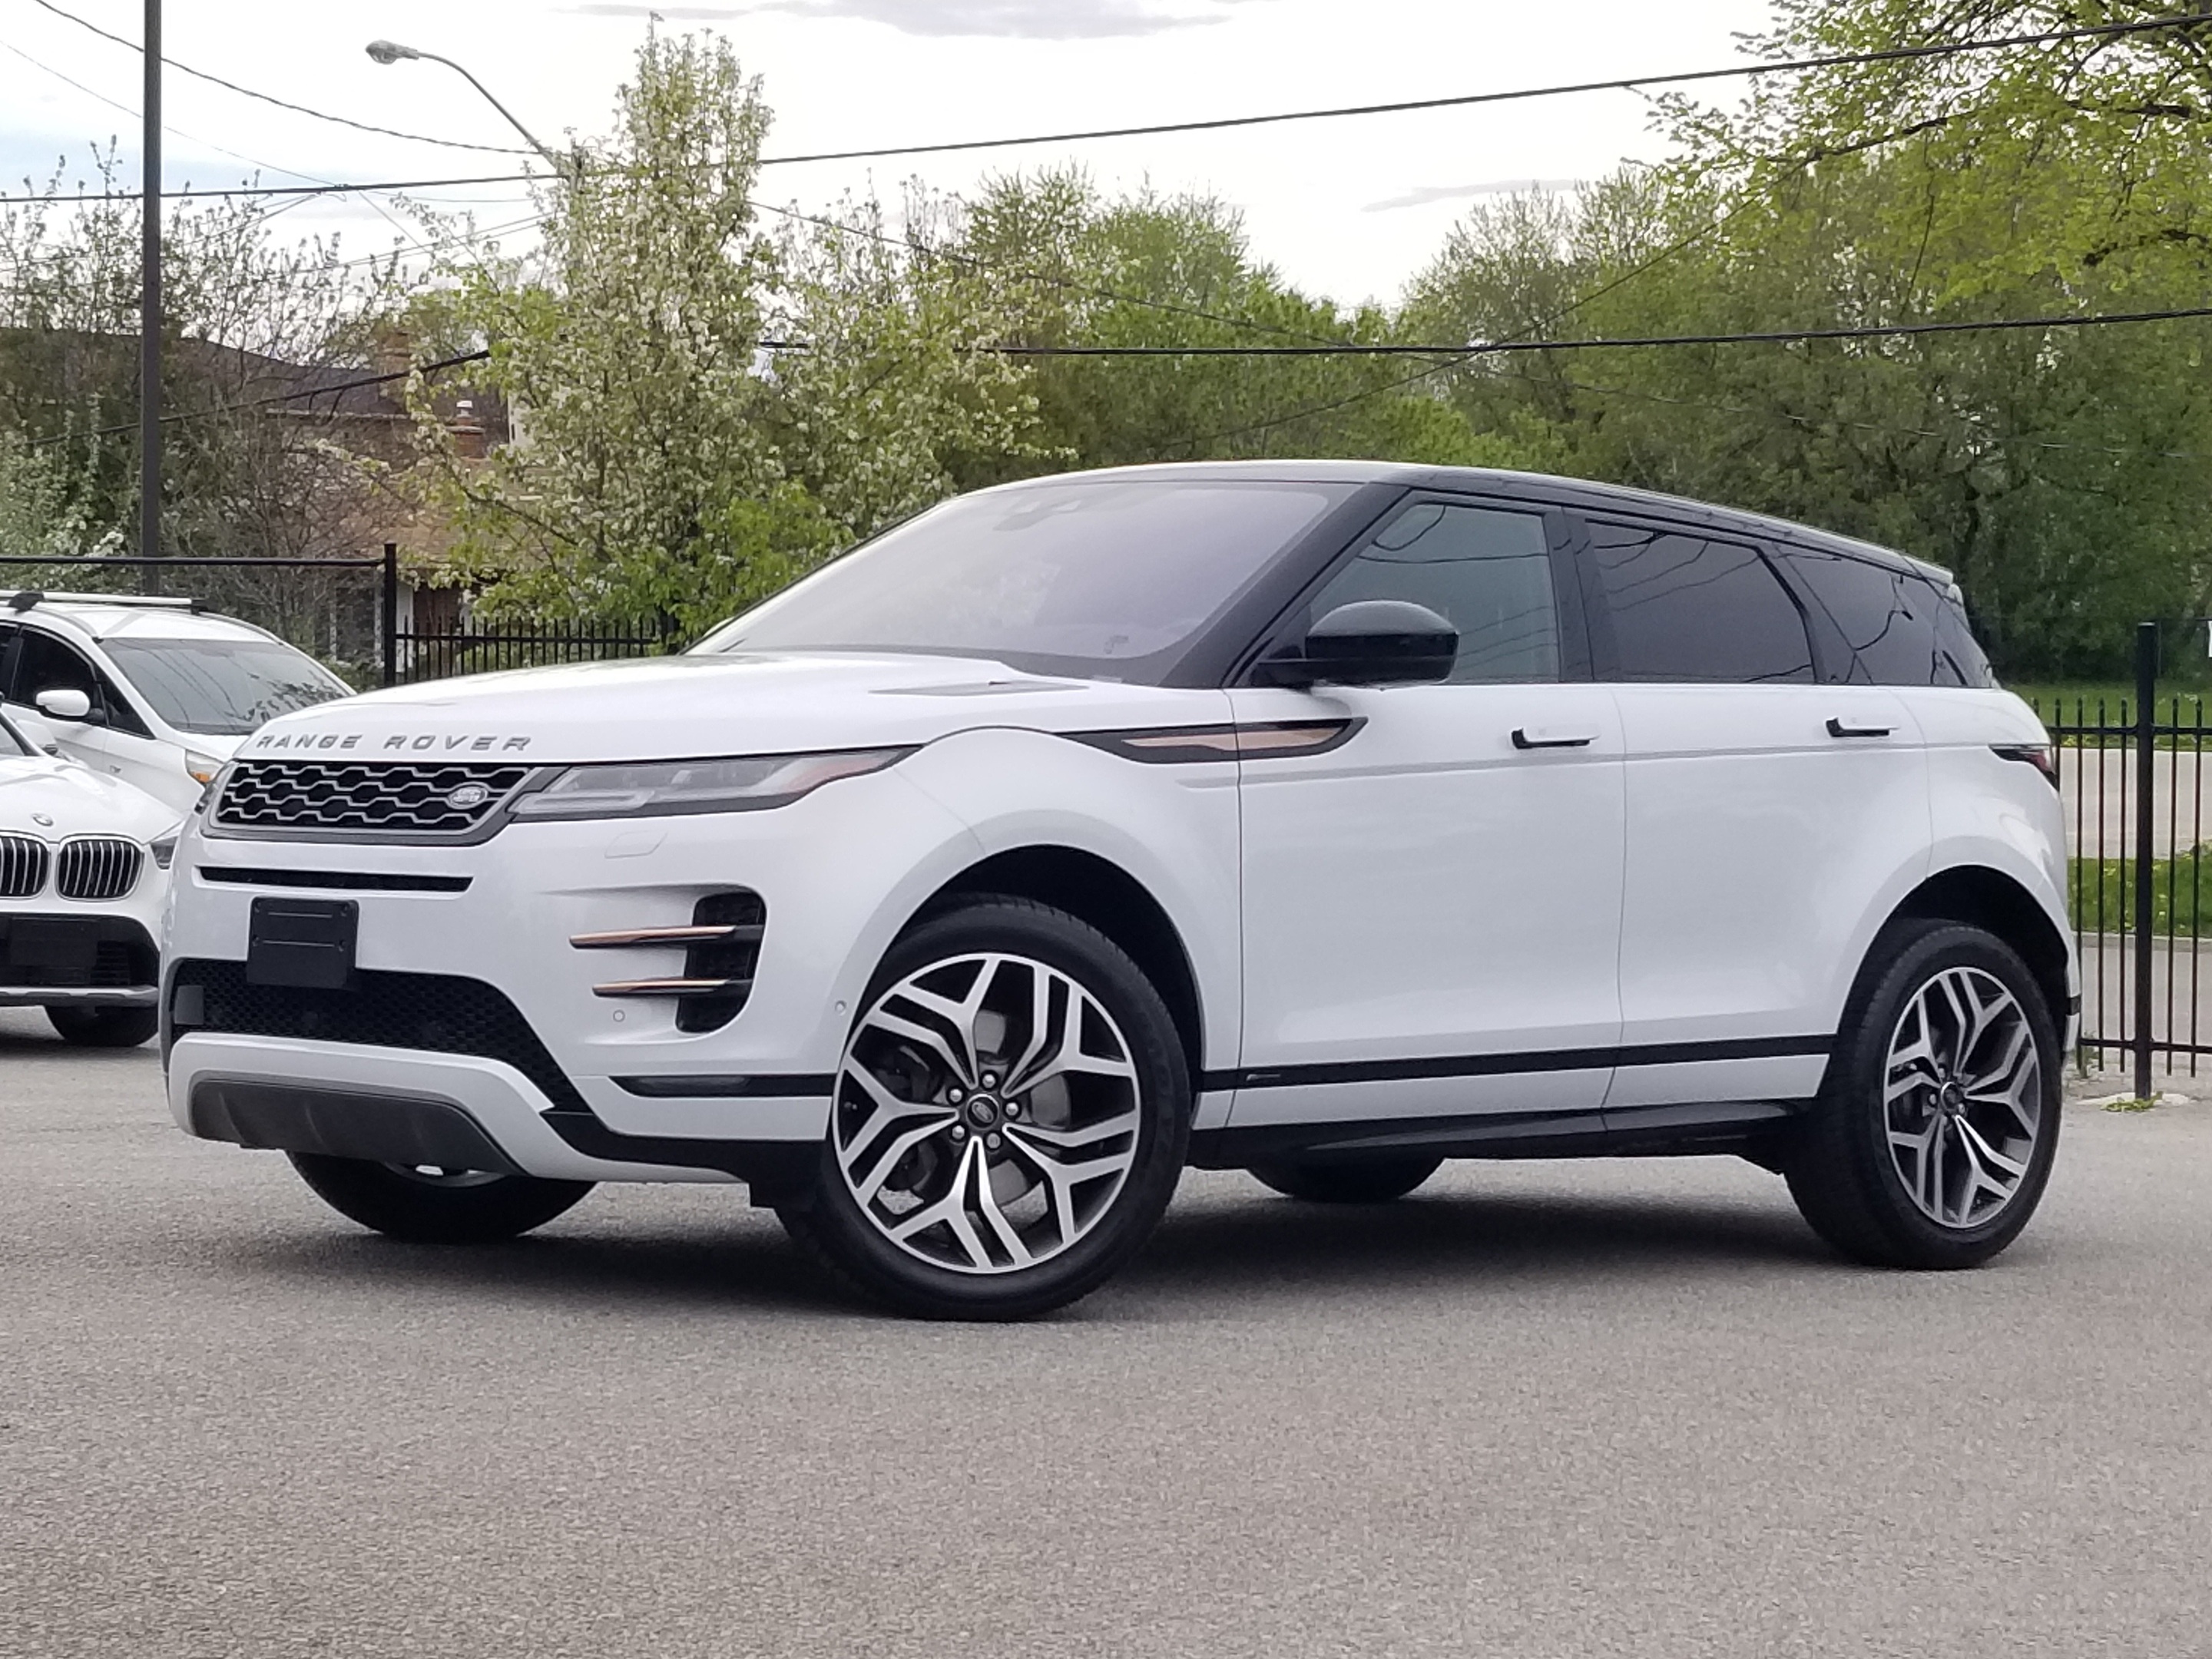 2020 Land Rover Range Rover Evoque FIRST EDITION|R-DYNAMIC|HUD|DRIVERS ASSIST|NAV